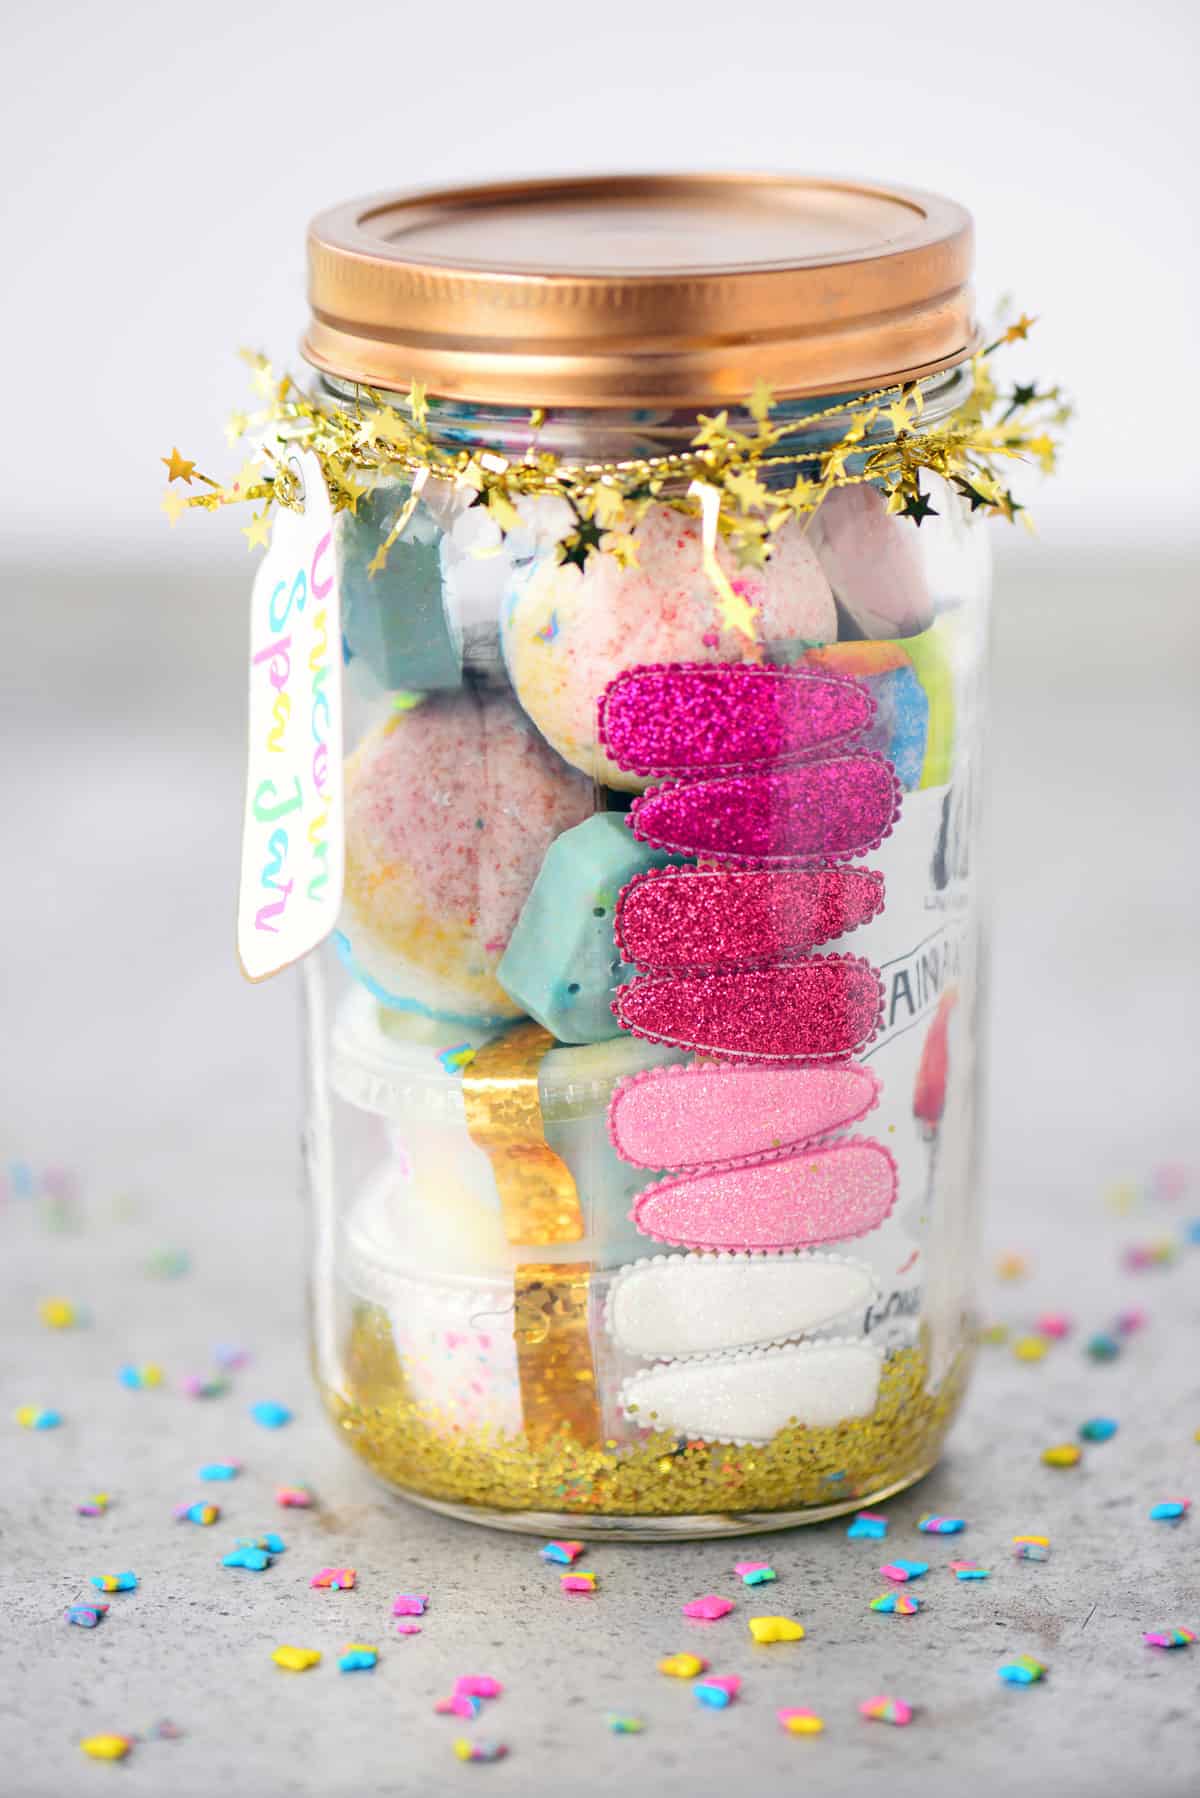 Add sparkling hair clips along the side of the jar.